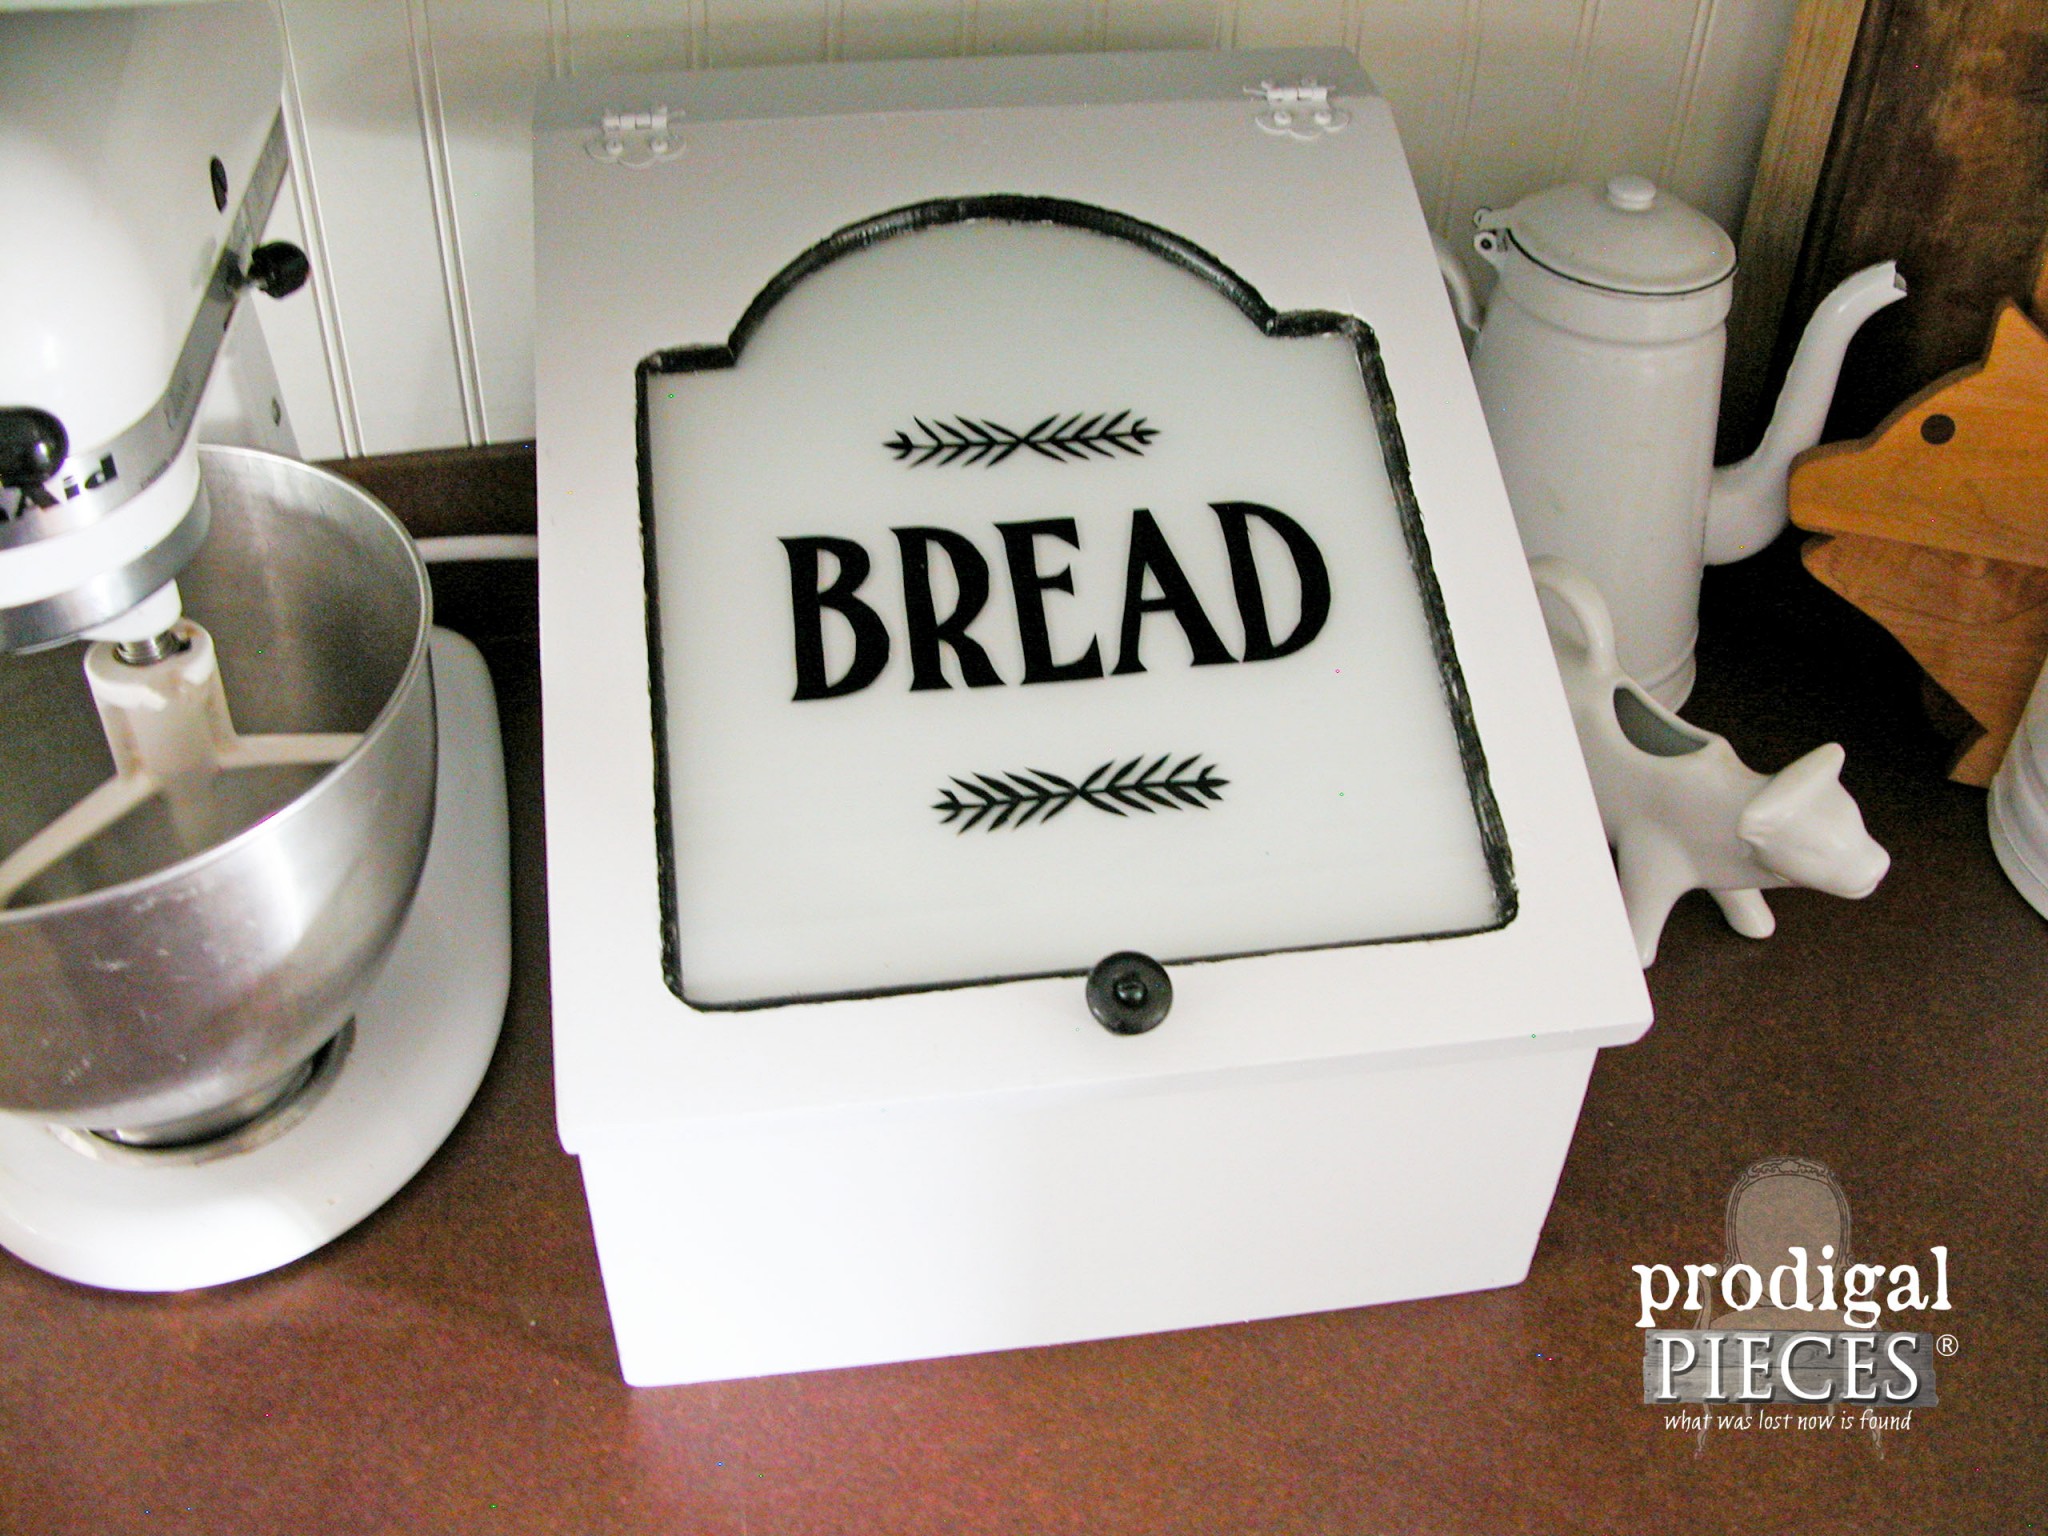 Vintage Bread Box Upcycled into Farmhouse Charging Station by Prodigal Pieces | www.prodigalpieces.com